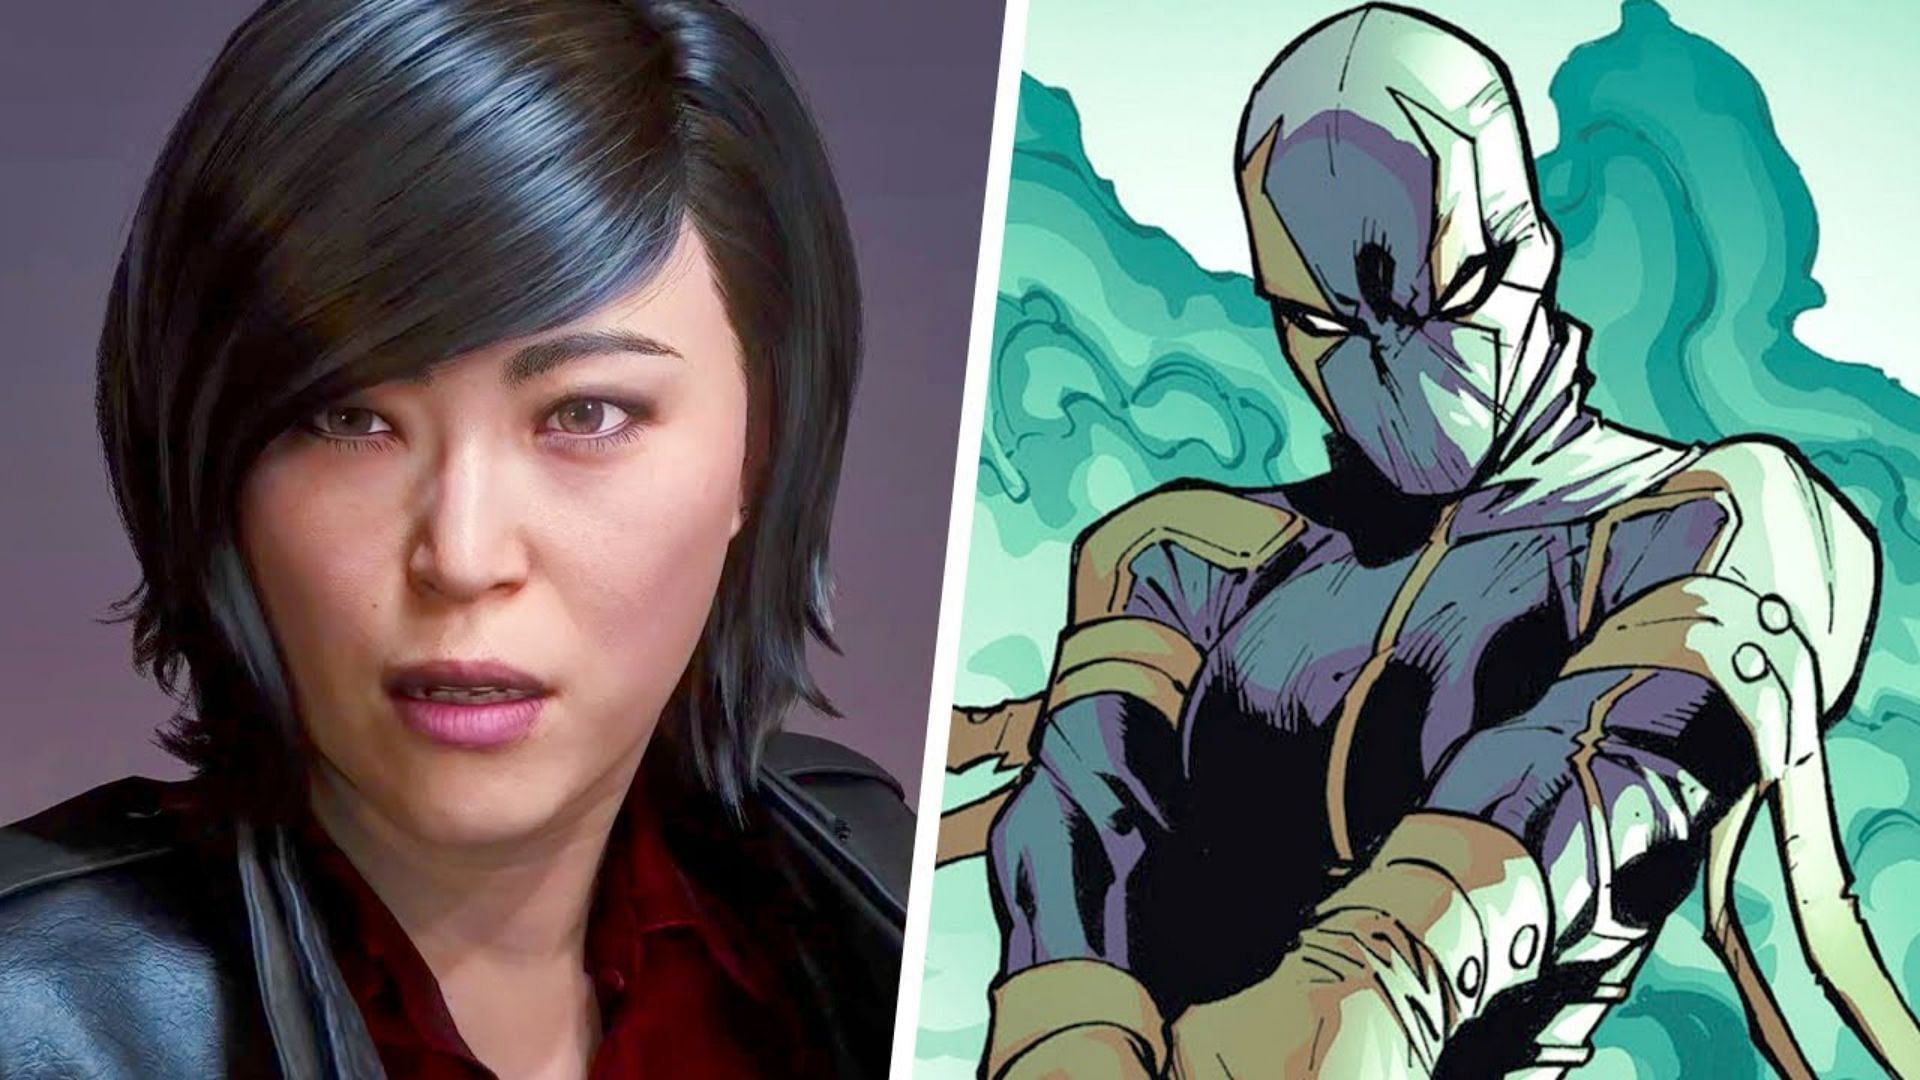 By the events of Spider-Man 2, Yuri has adopted the persona of Wraith (Image via Marvel/Insomniac)